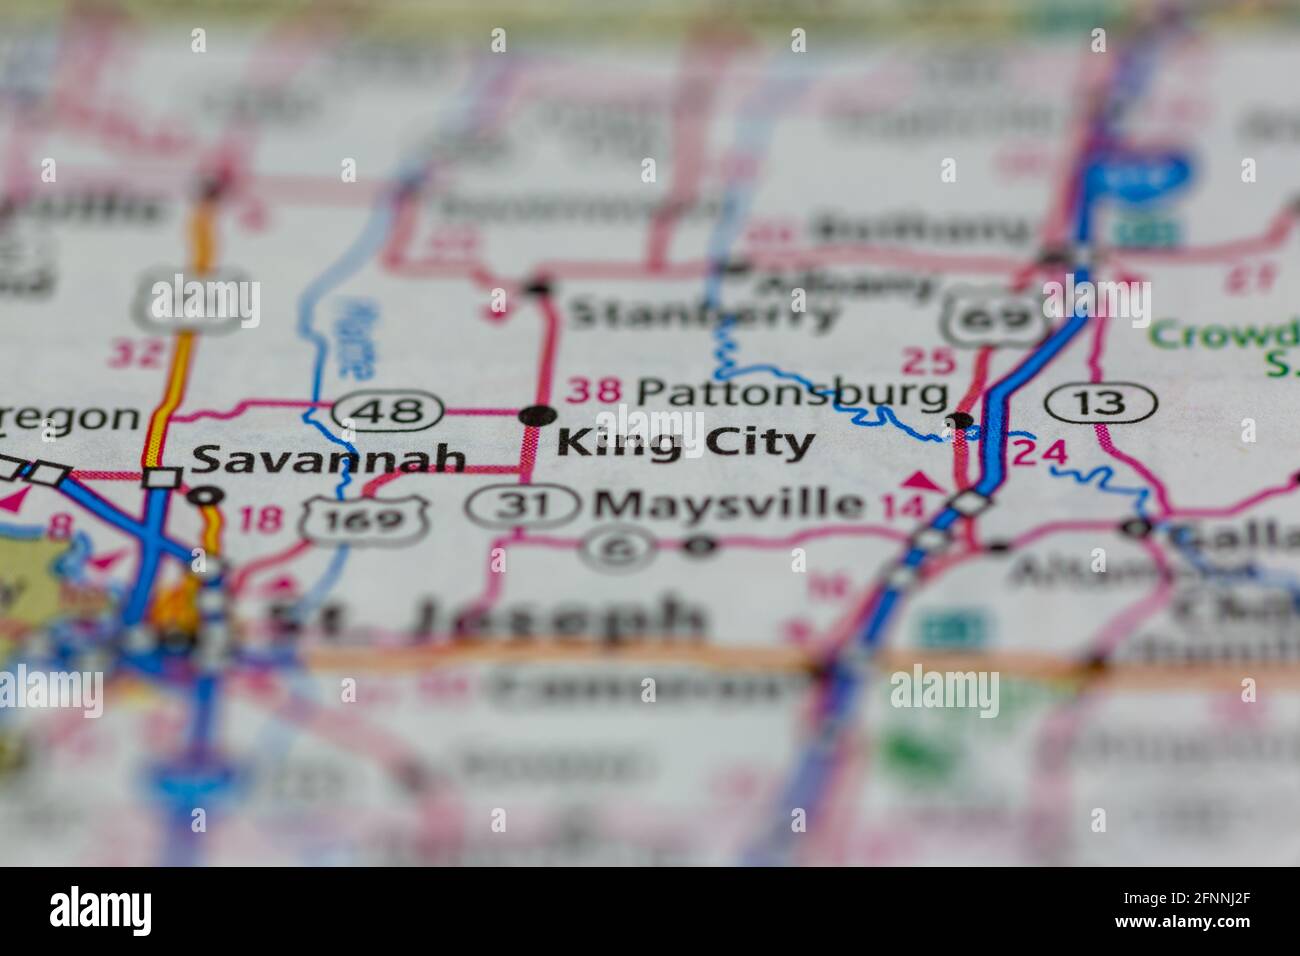 King City Missouri USA shown on a Geography map or road map Stock Photo